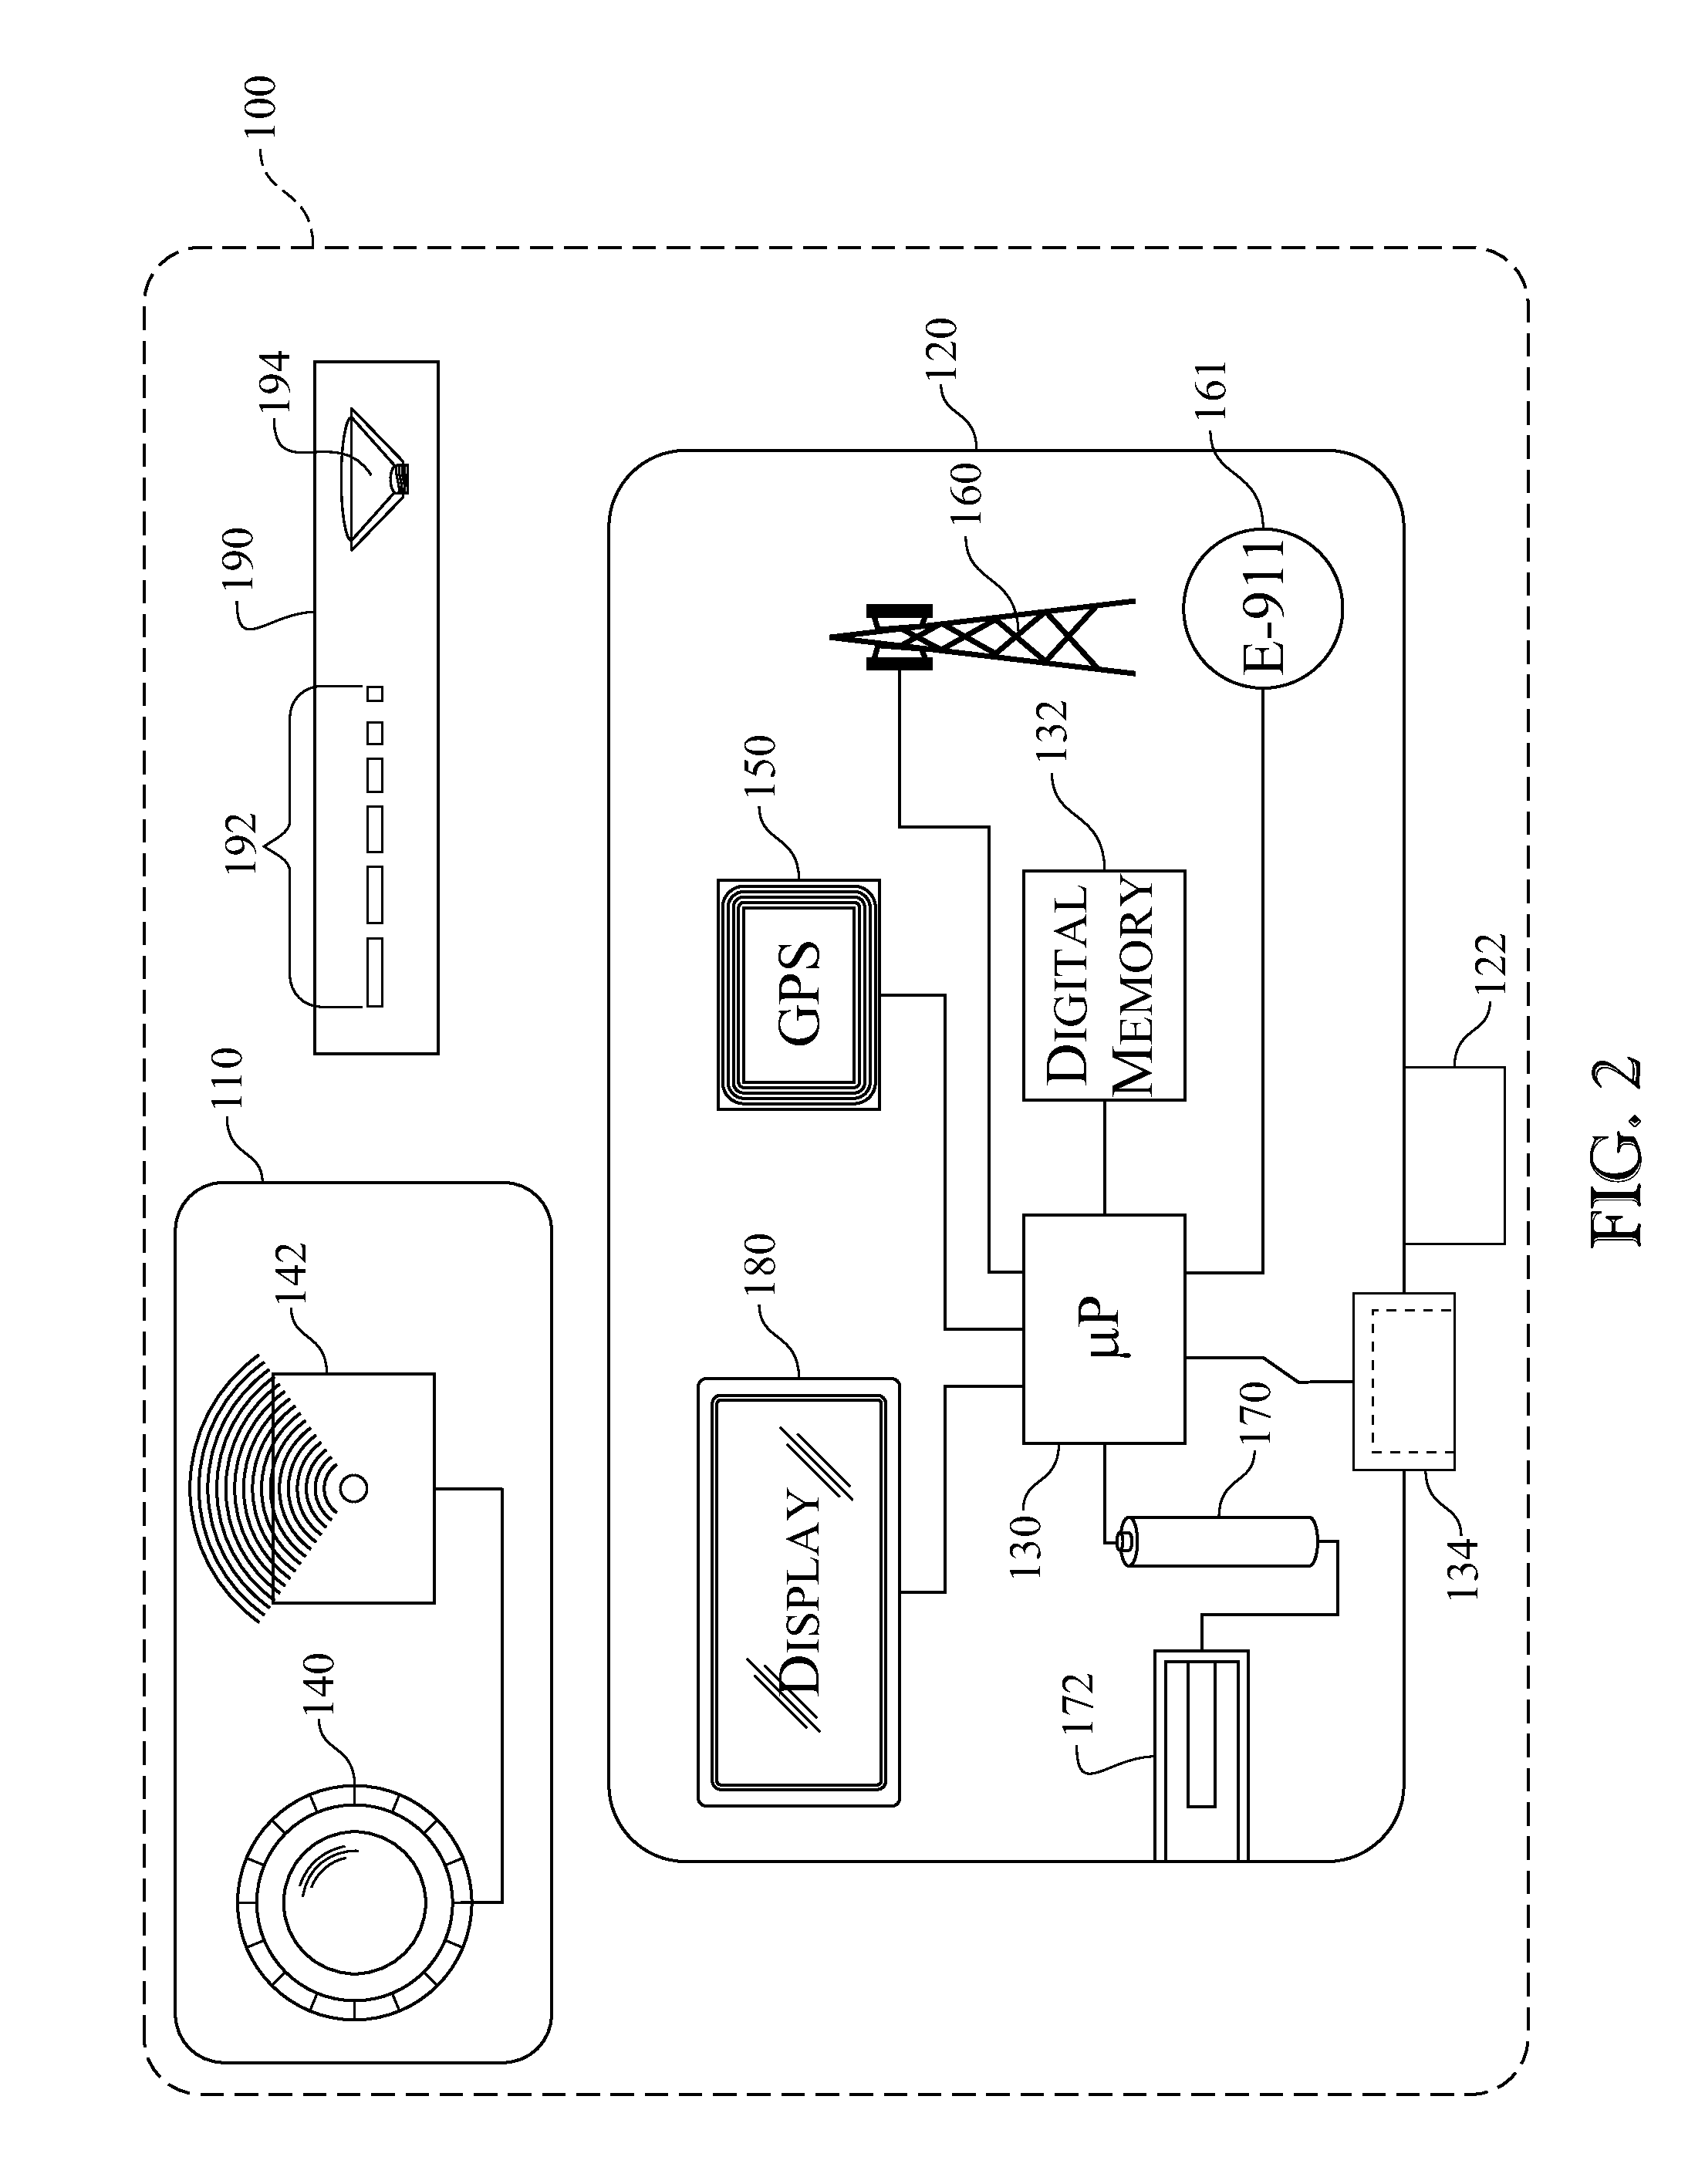 Rear Encroaching Vehicle Monitoring And Alerting System